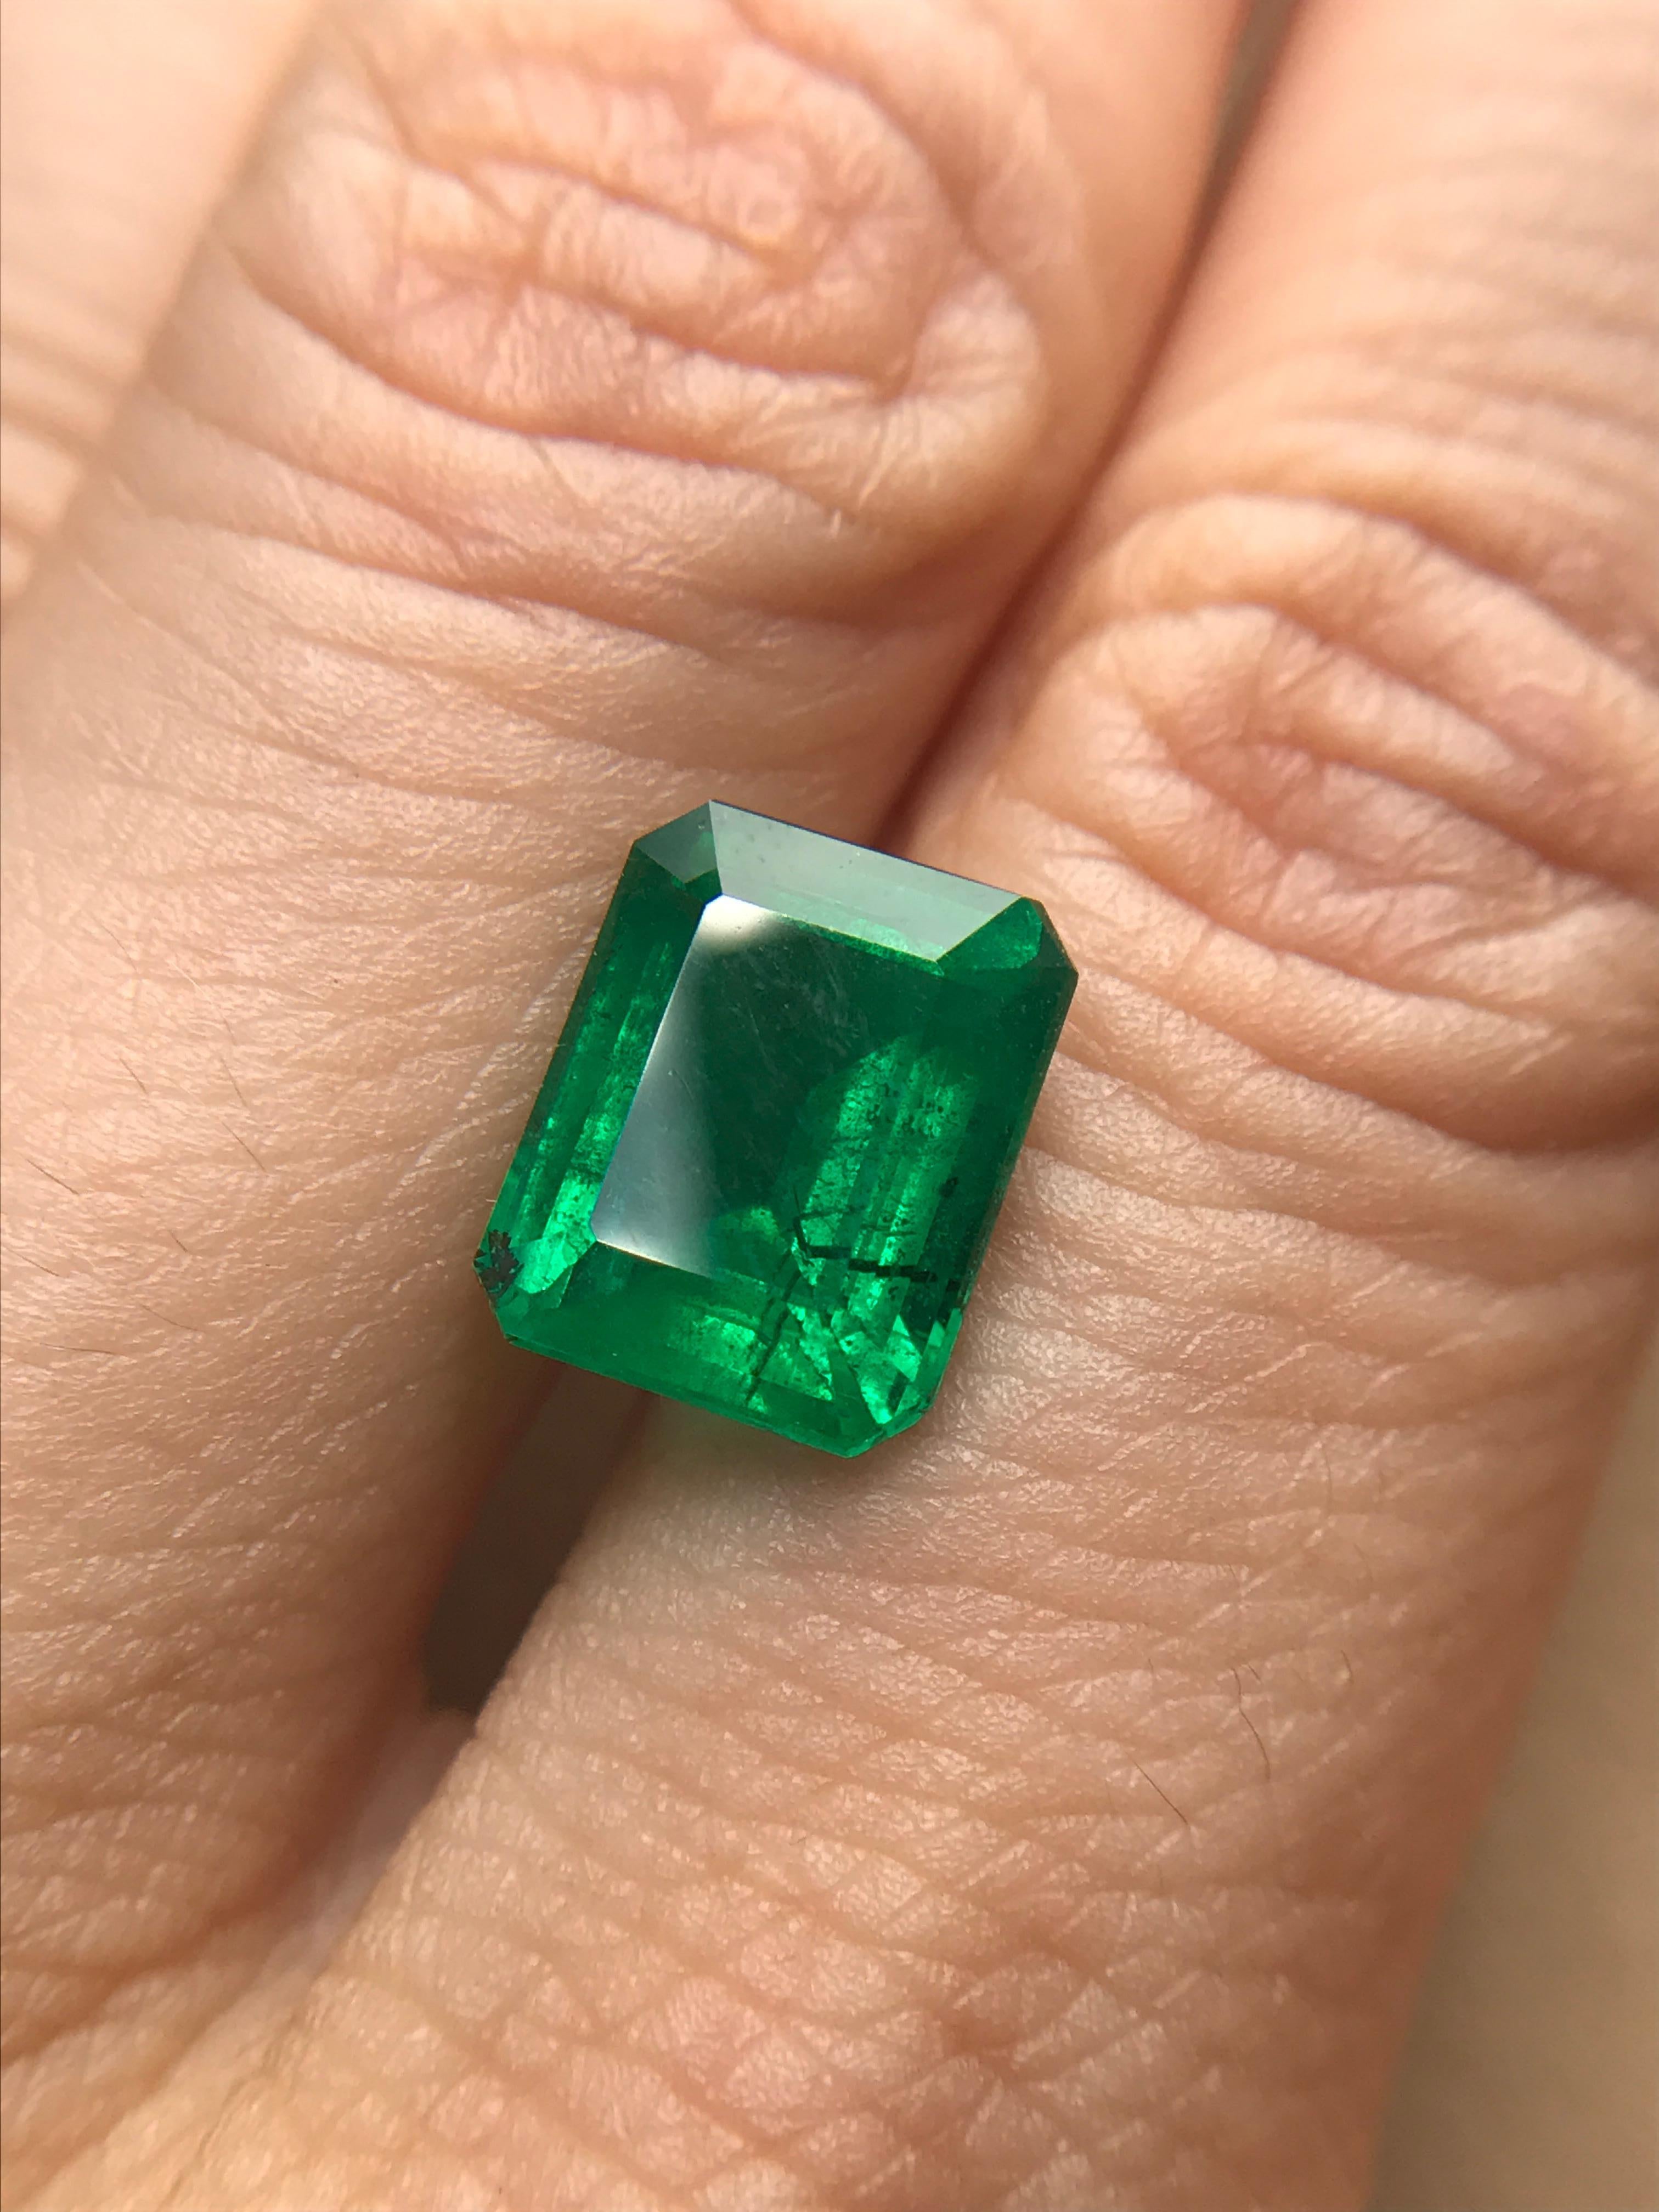 how much is emerald per carat